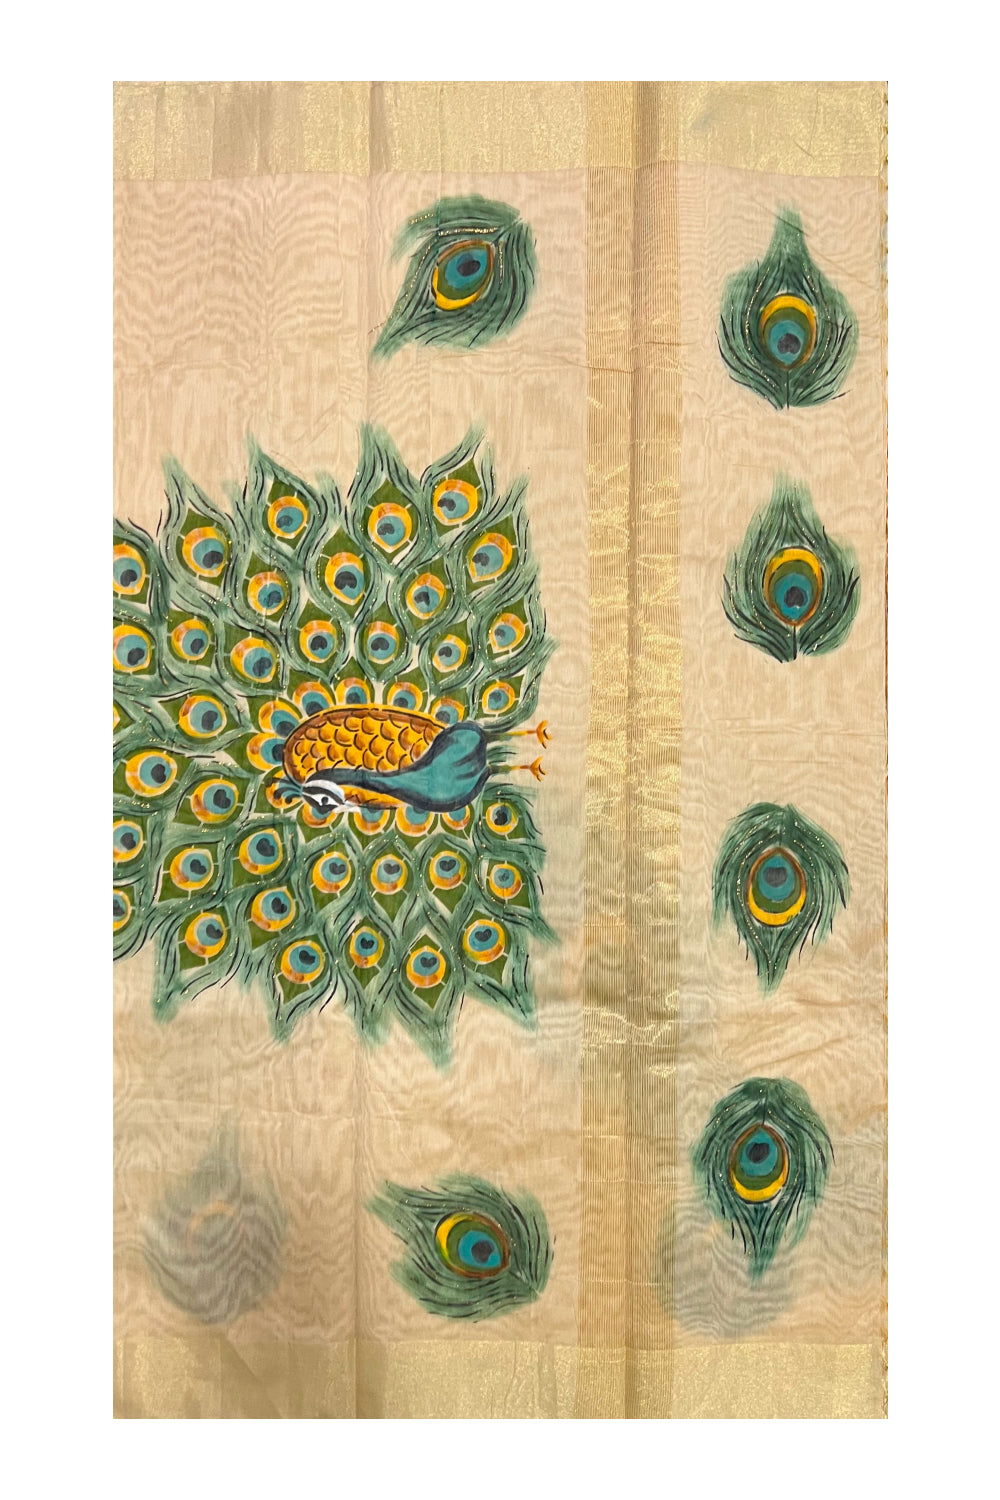 Southloom Light Brown Cotton Designer Saree with Mural Painted Work